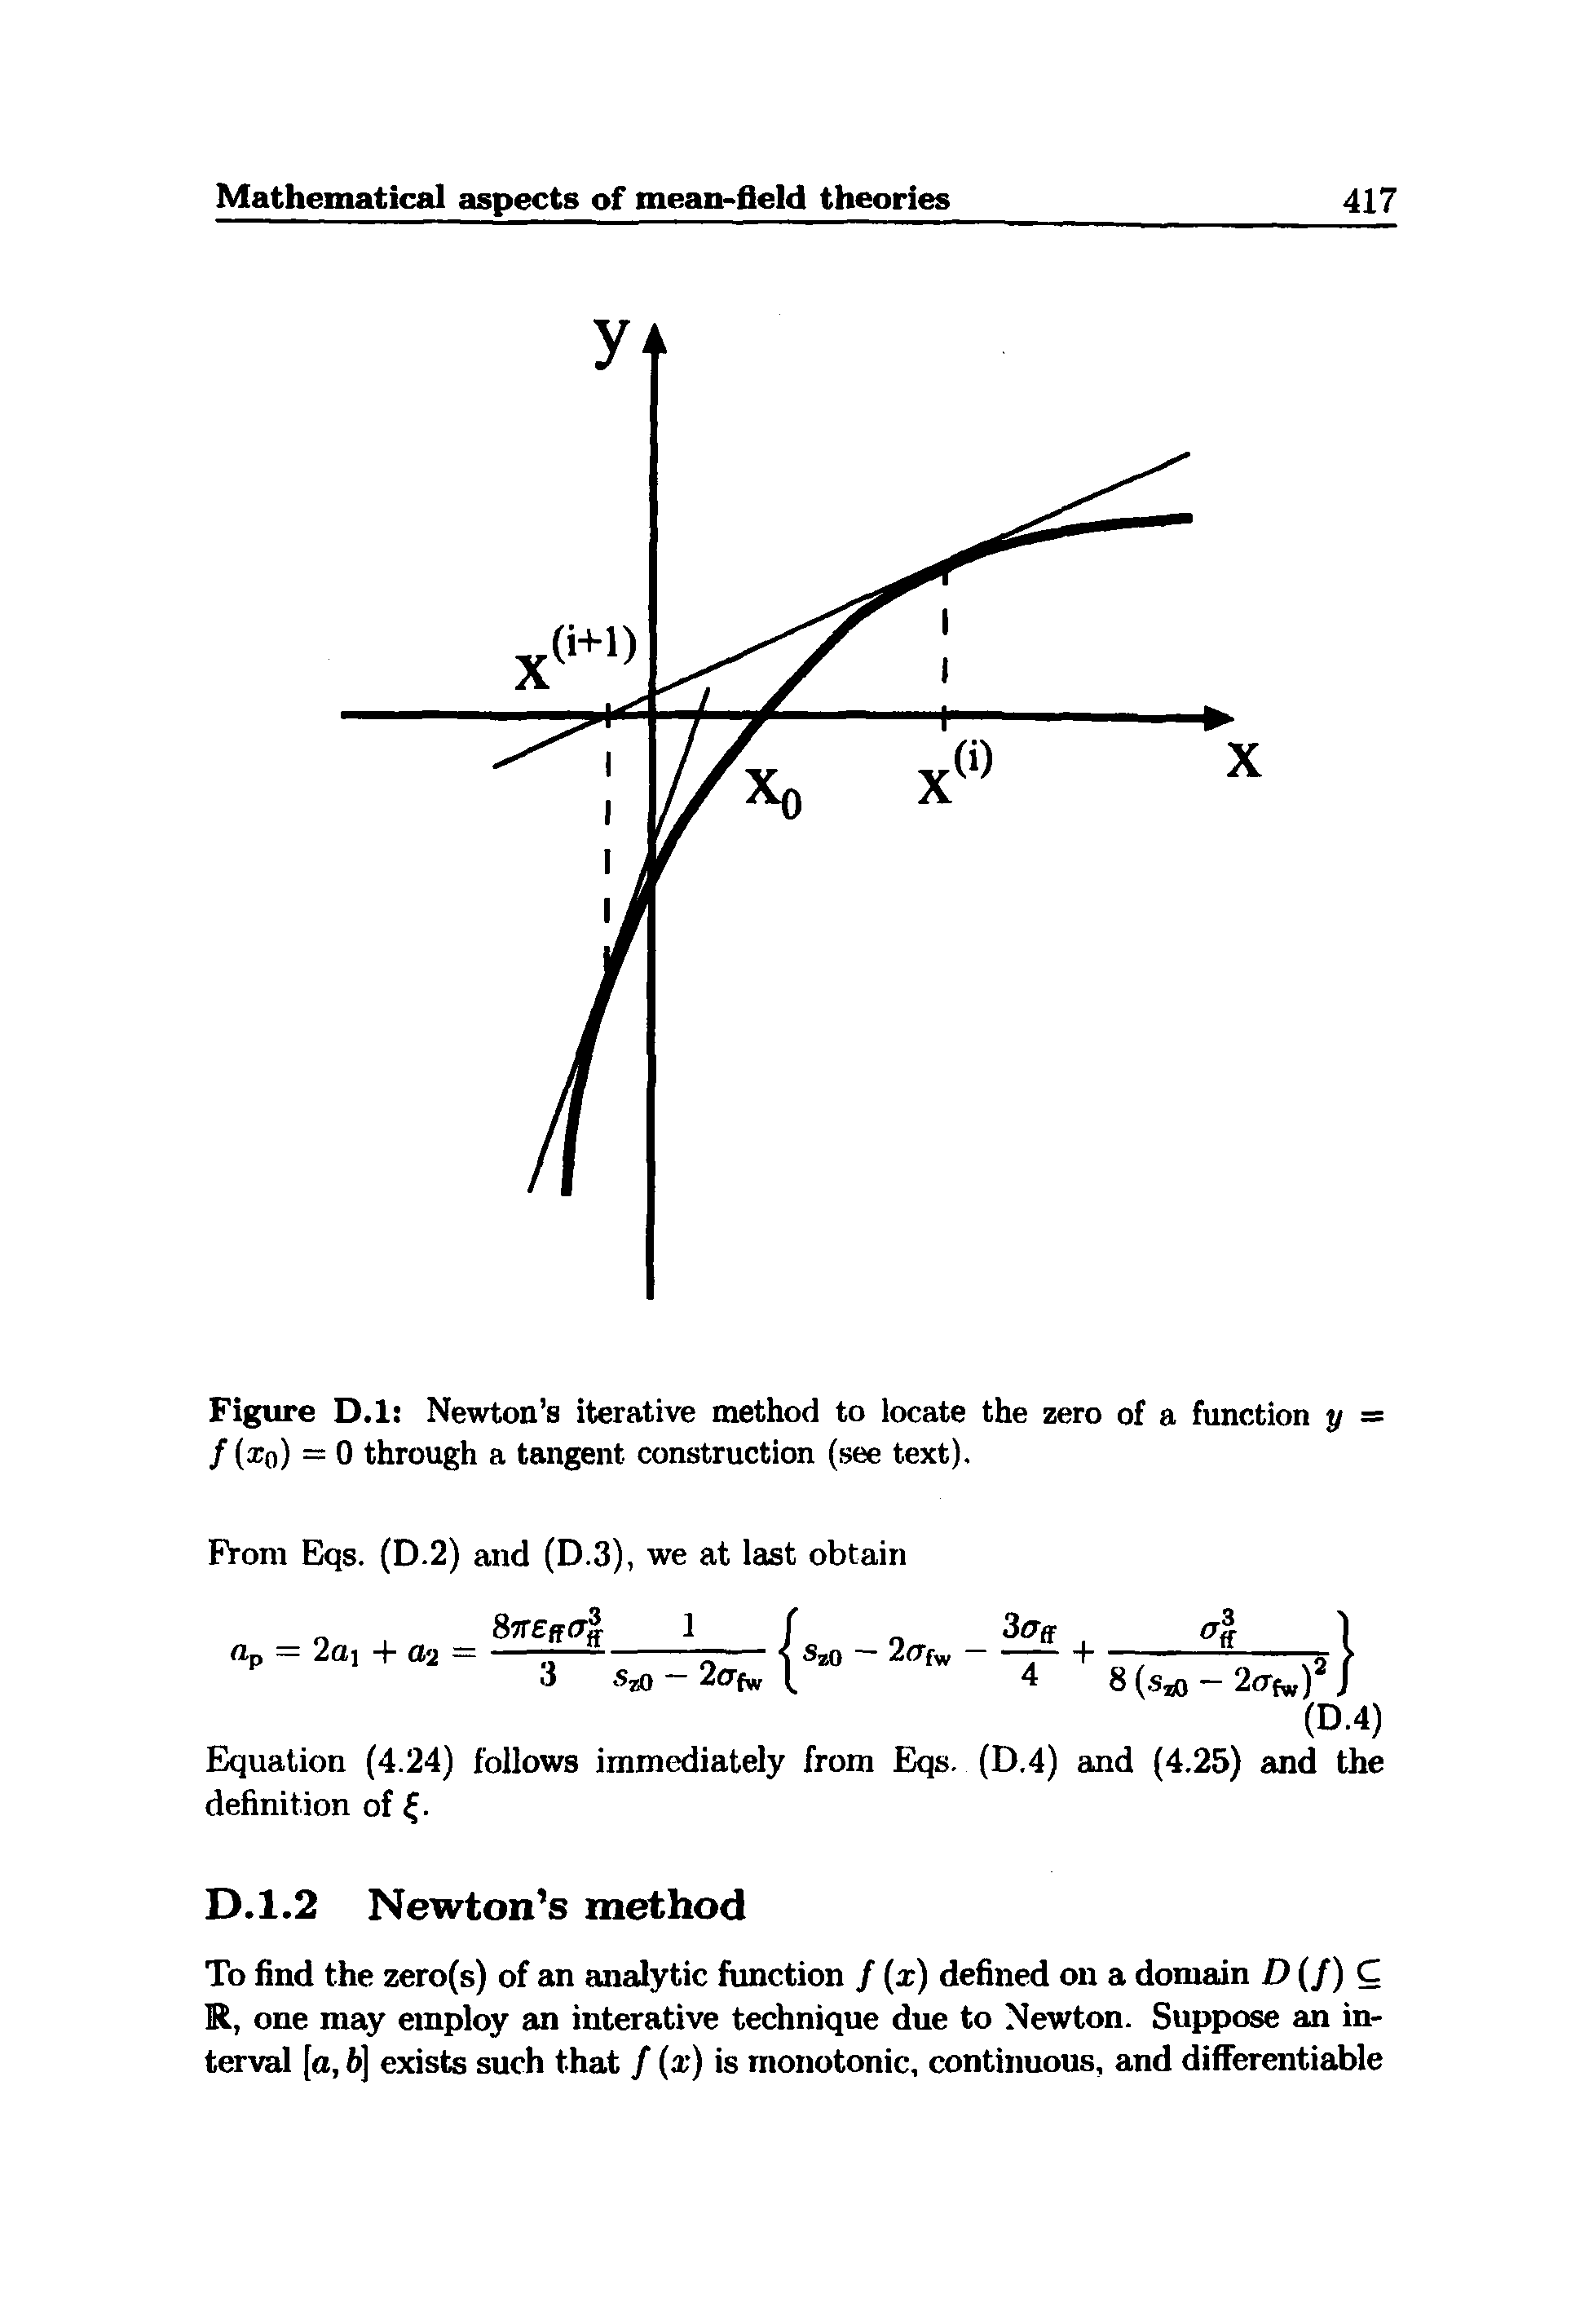 Figure D.l Newton s iterative method to locate the zero of a function y = / (lo) = 0 through a tangent construction (see text).